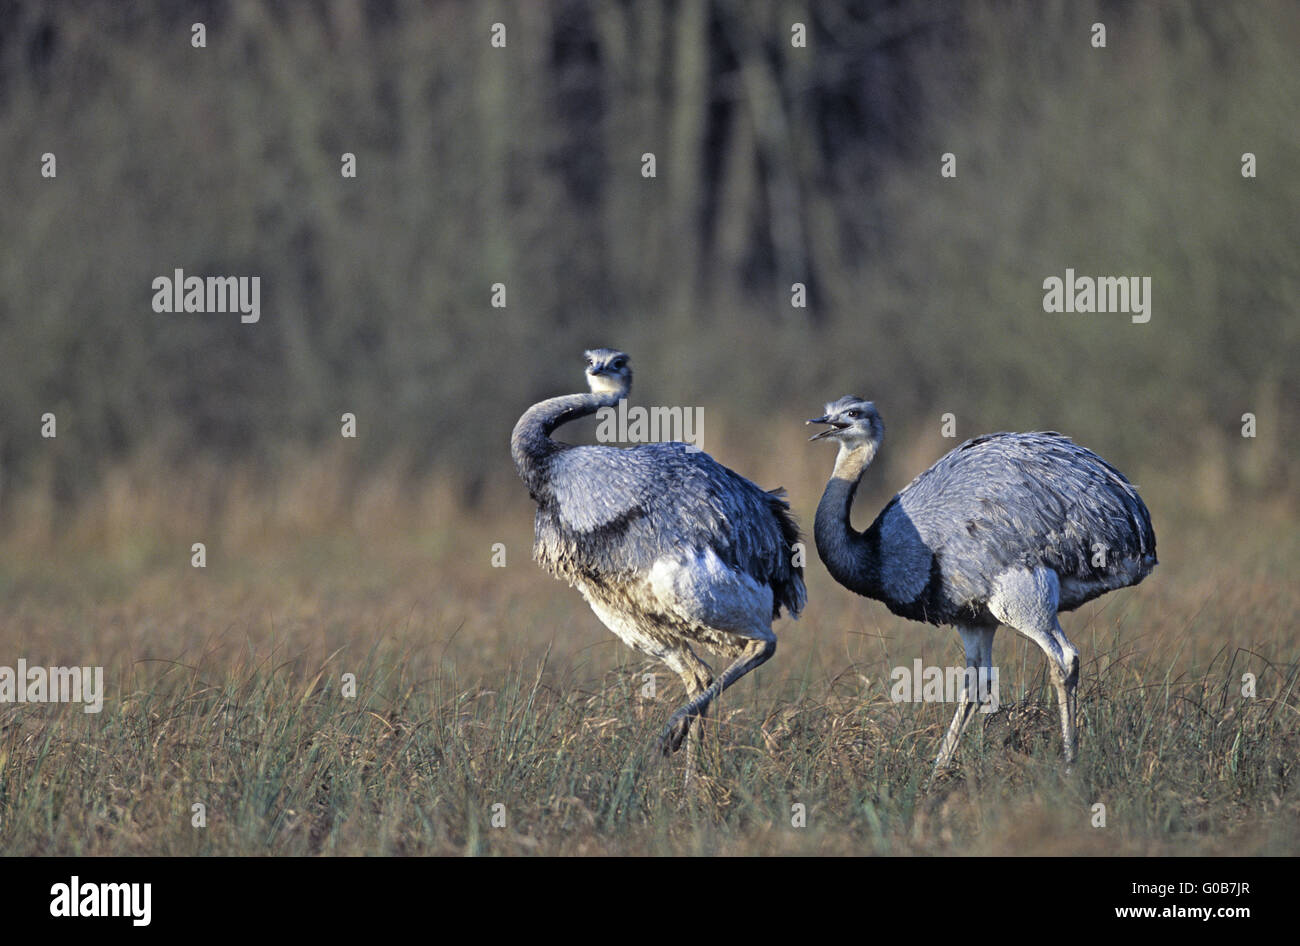 Greater Rhea threating a conspecific Stock Photo